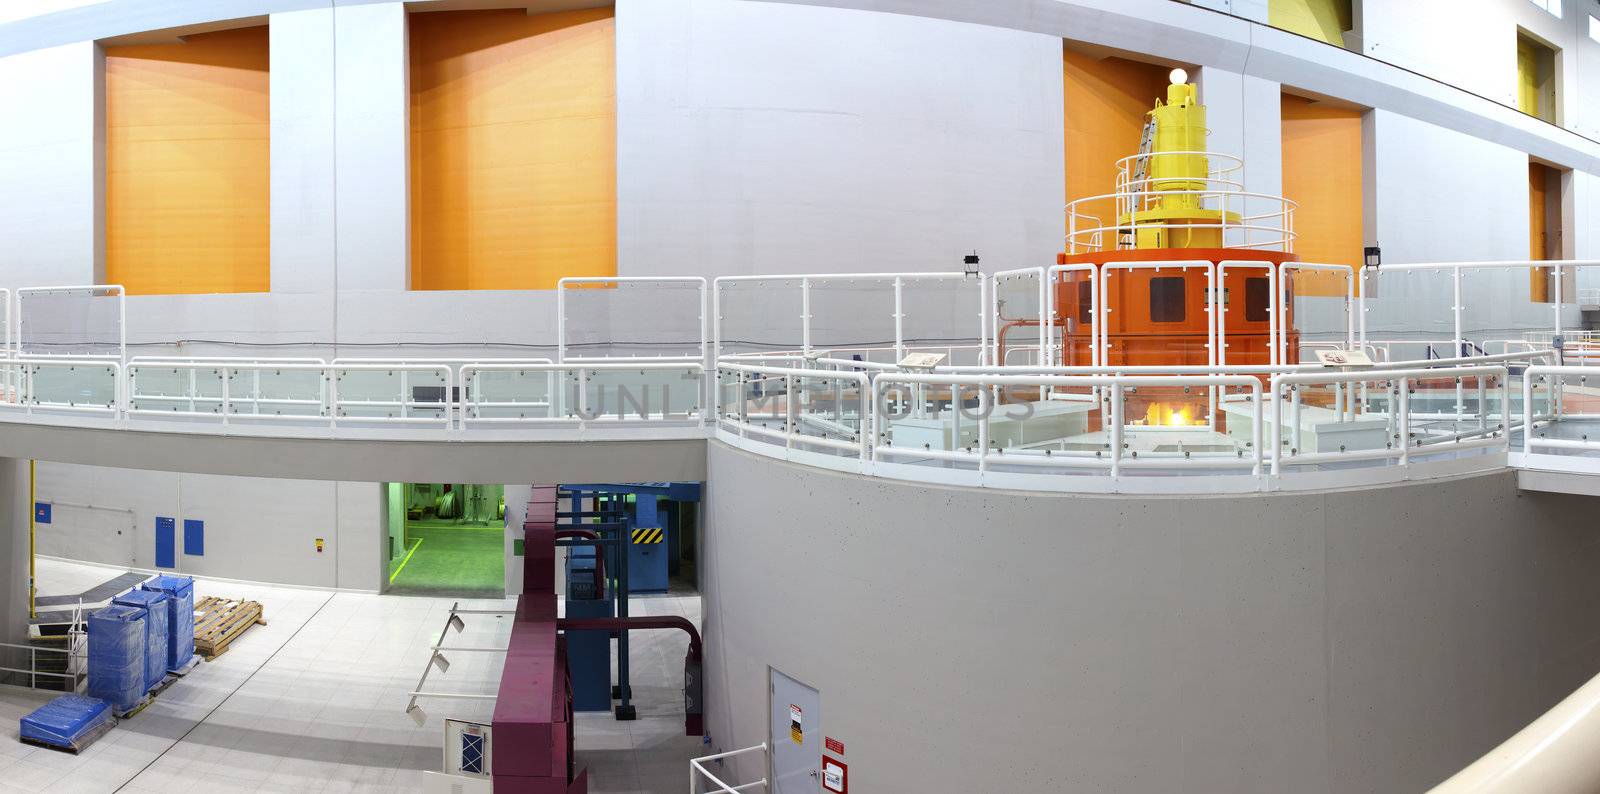 A panoramic interior of a power plant.